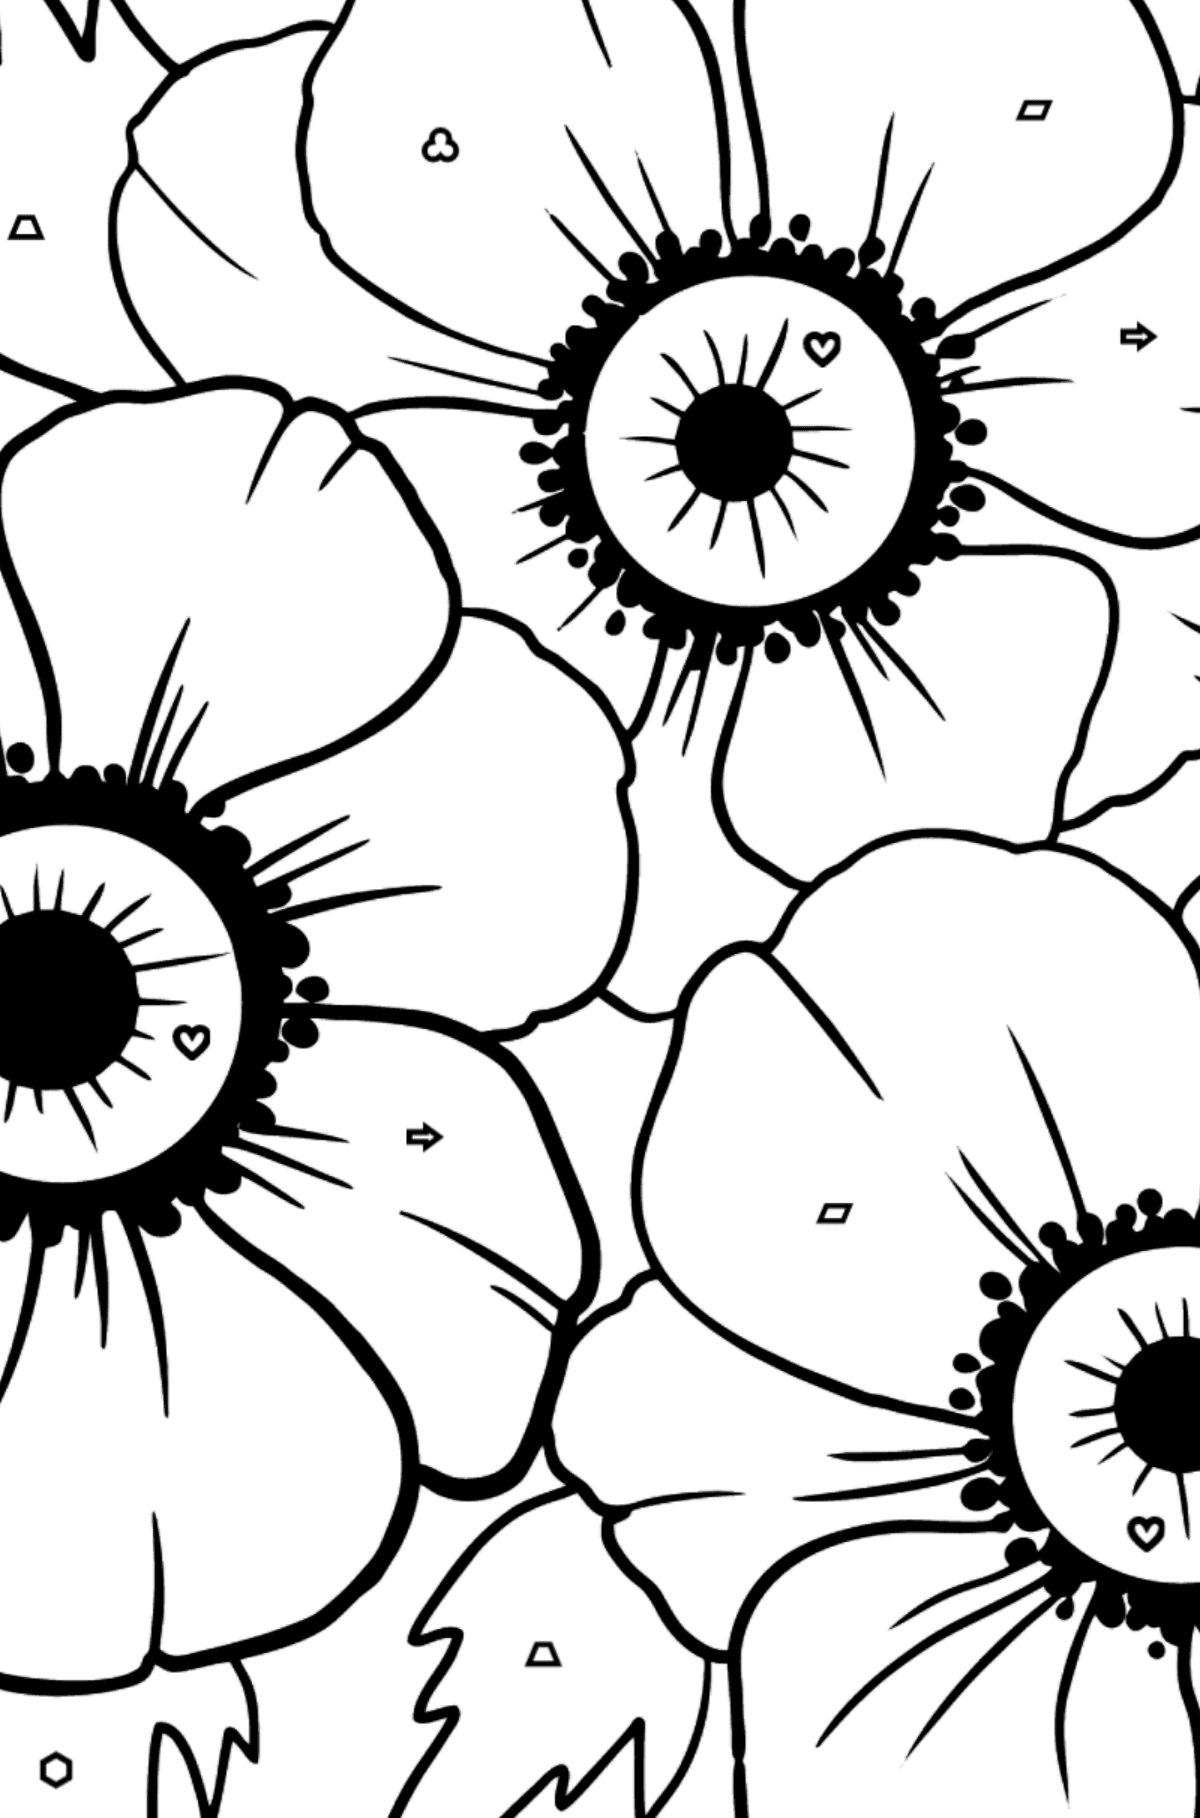 Coloring Page Anemone Mr. Fokker - Coloring by Geometric Shapes for Kids